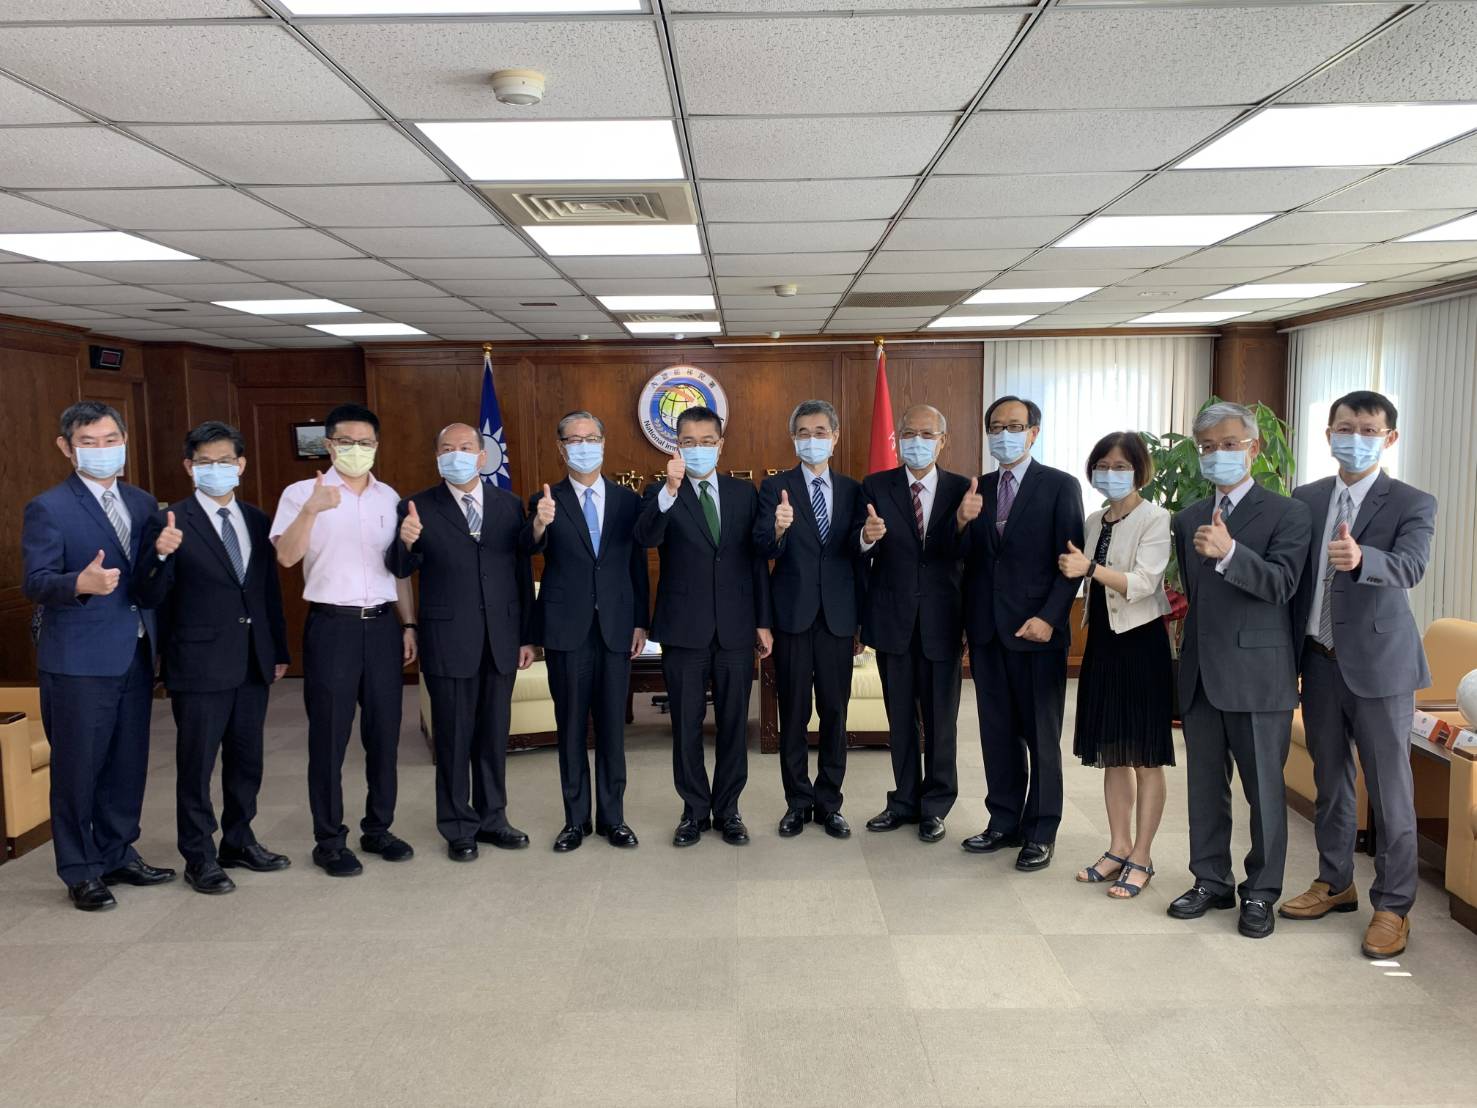 The Minister of the Interior Hsu Kuo-Yung (middle) went to the National Immigration Agency to thank colleagues and took a group photo with the Director of the Immigration Department Chung Ching-Kun (5th from left) and others. (Photo/provided by the National ImmigrationAgency)